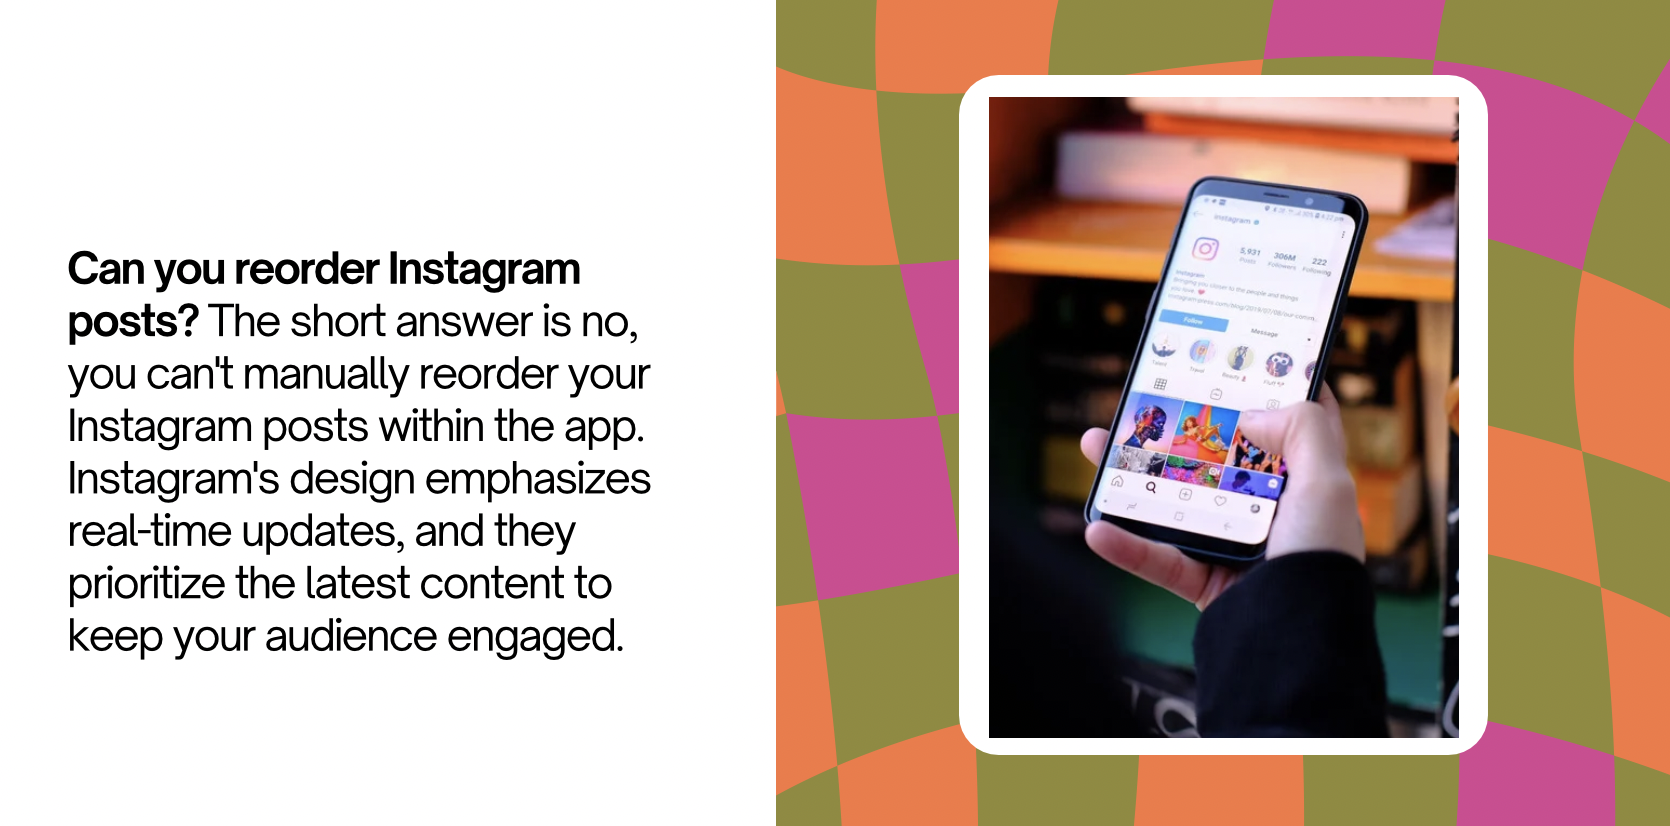 Can You Reorder Instagram Posts? How to Edit Your Feed?